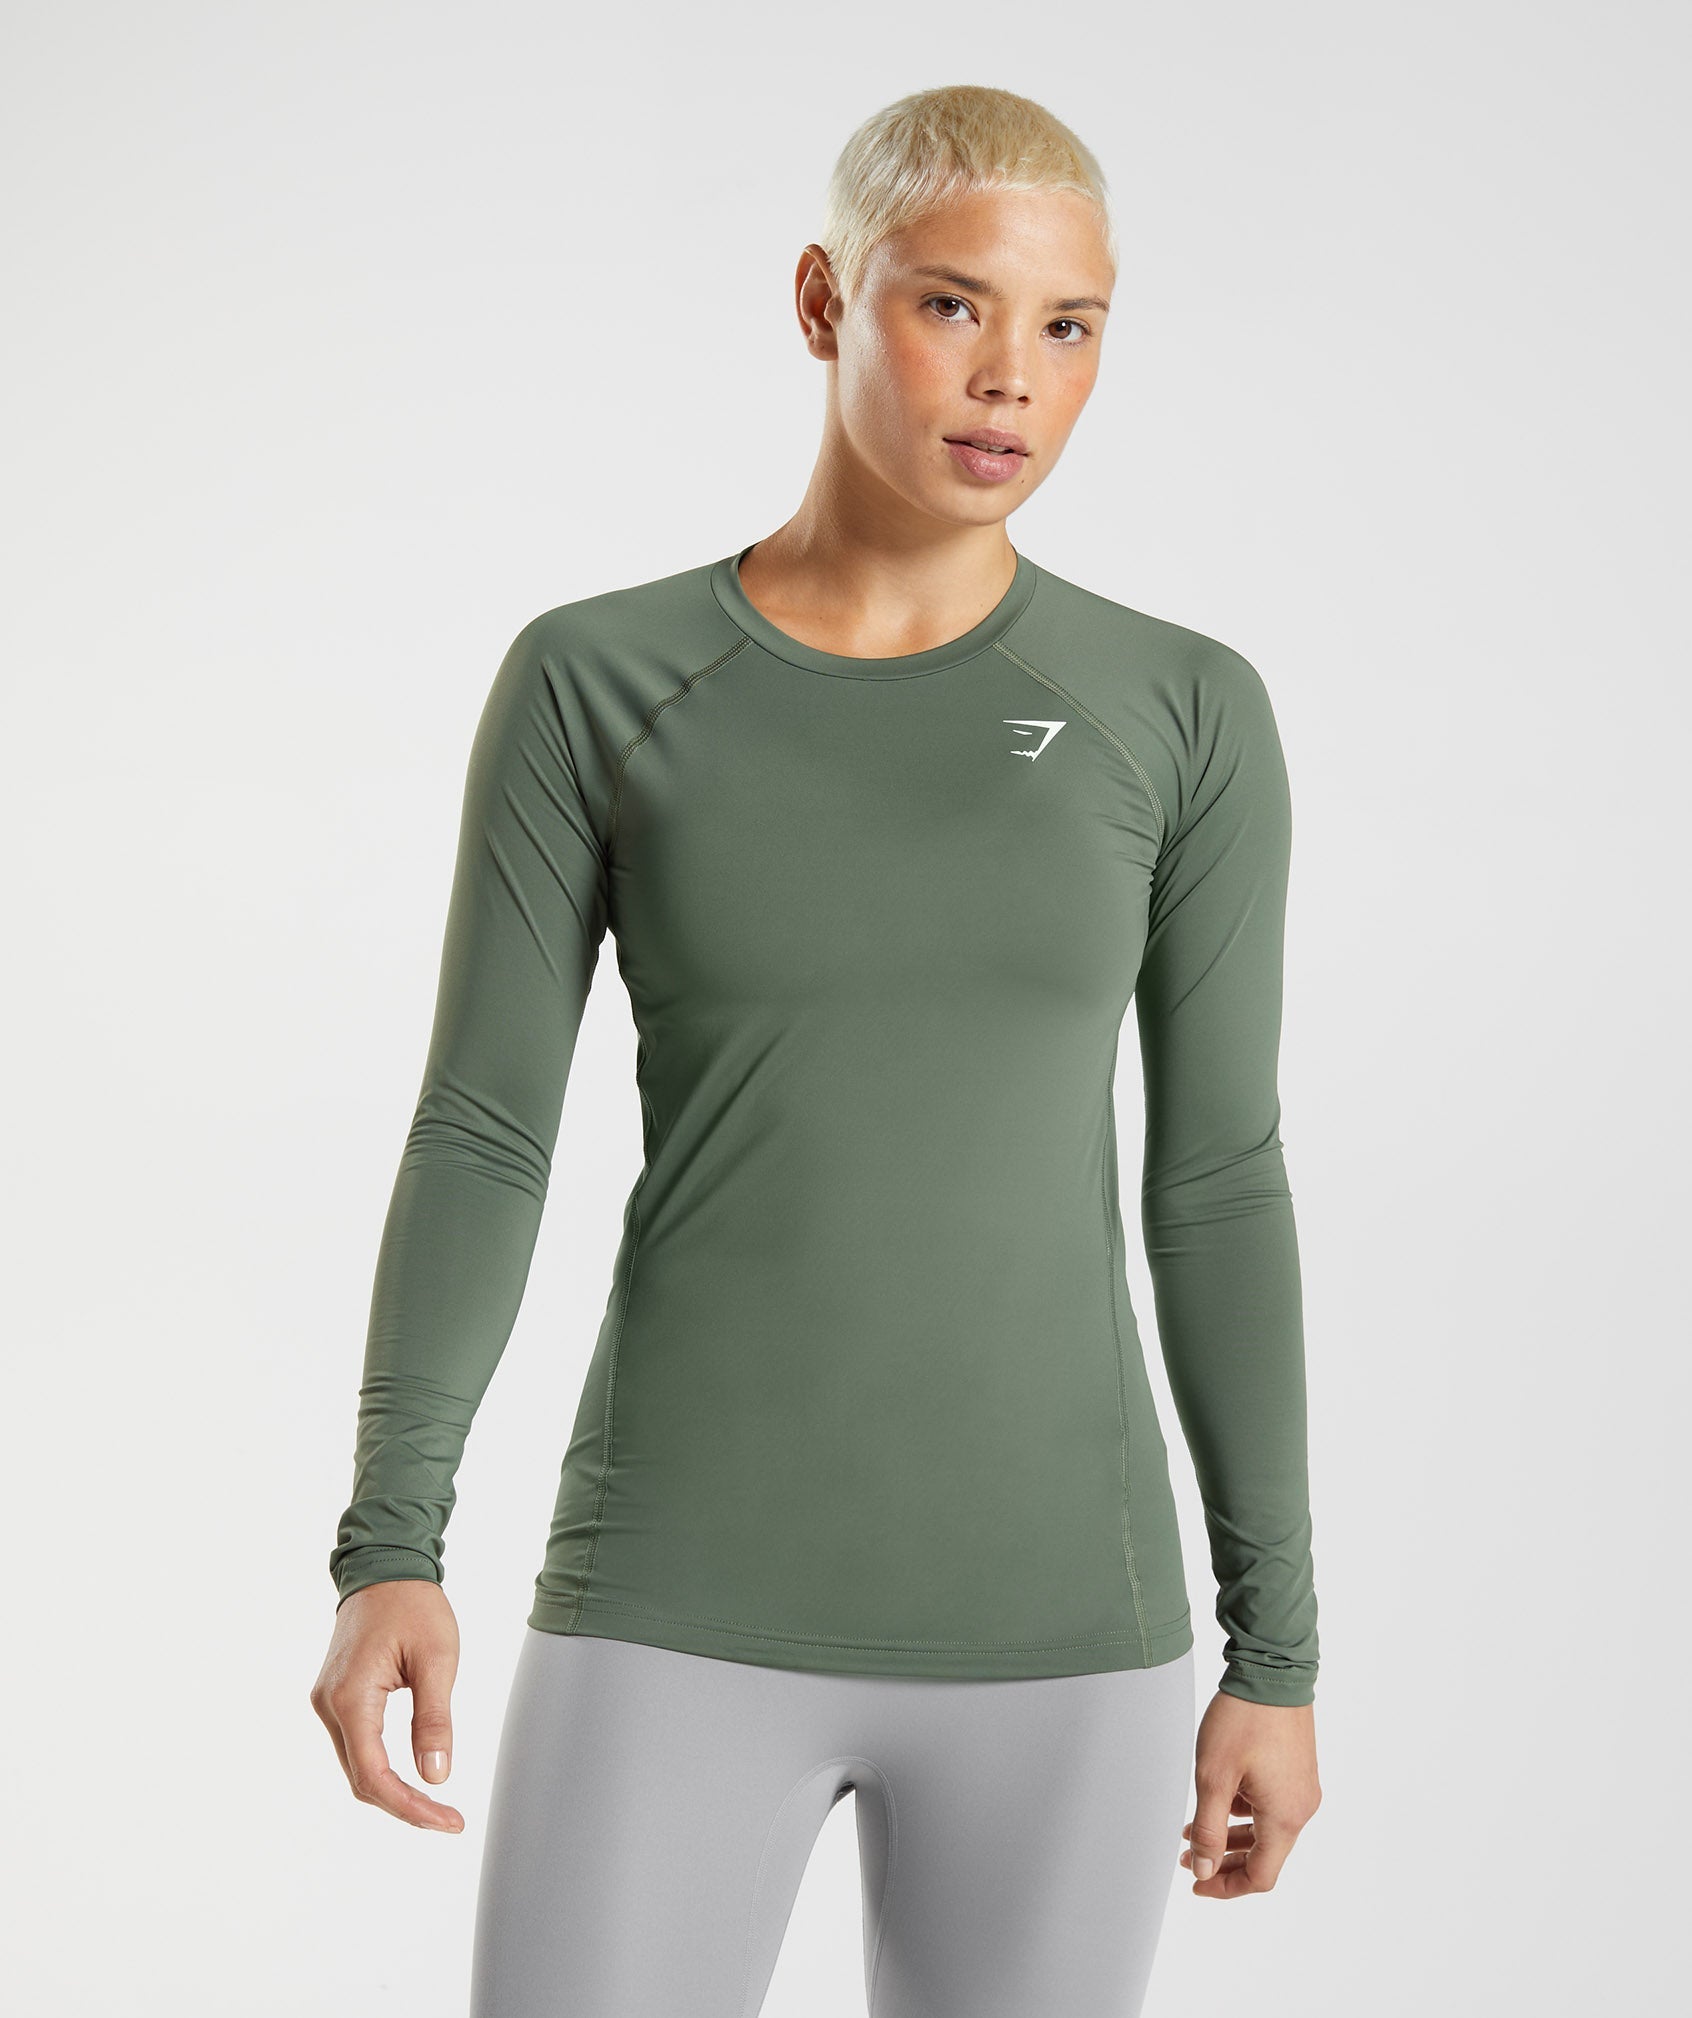 Training Baselayer Long Sleeve Top in Core Olive - view 1